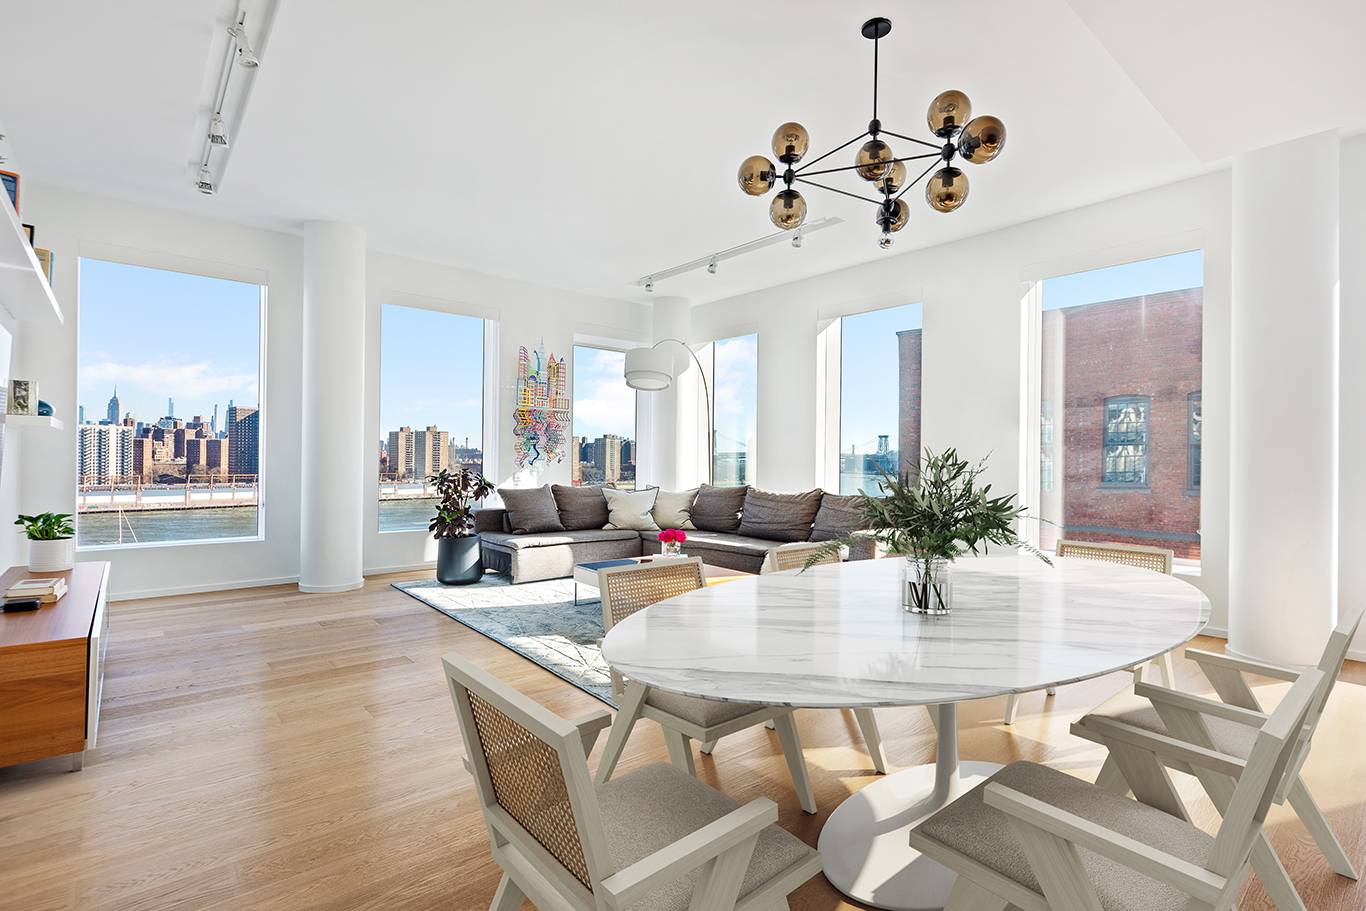 AVAILABLE 8 1. 1 John Street is the premier waterfront condominium in DUMBO.